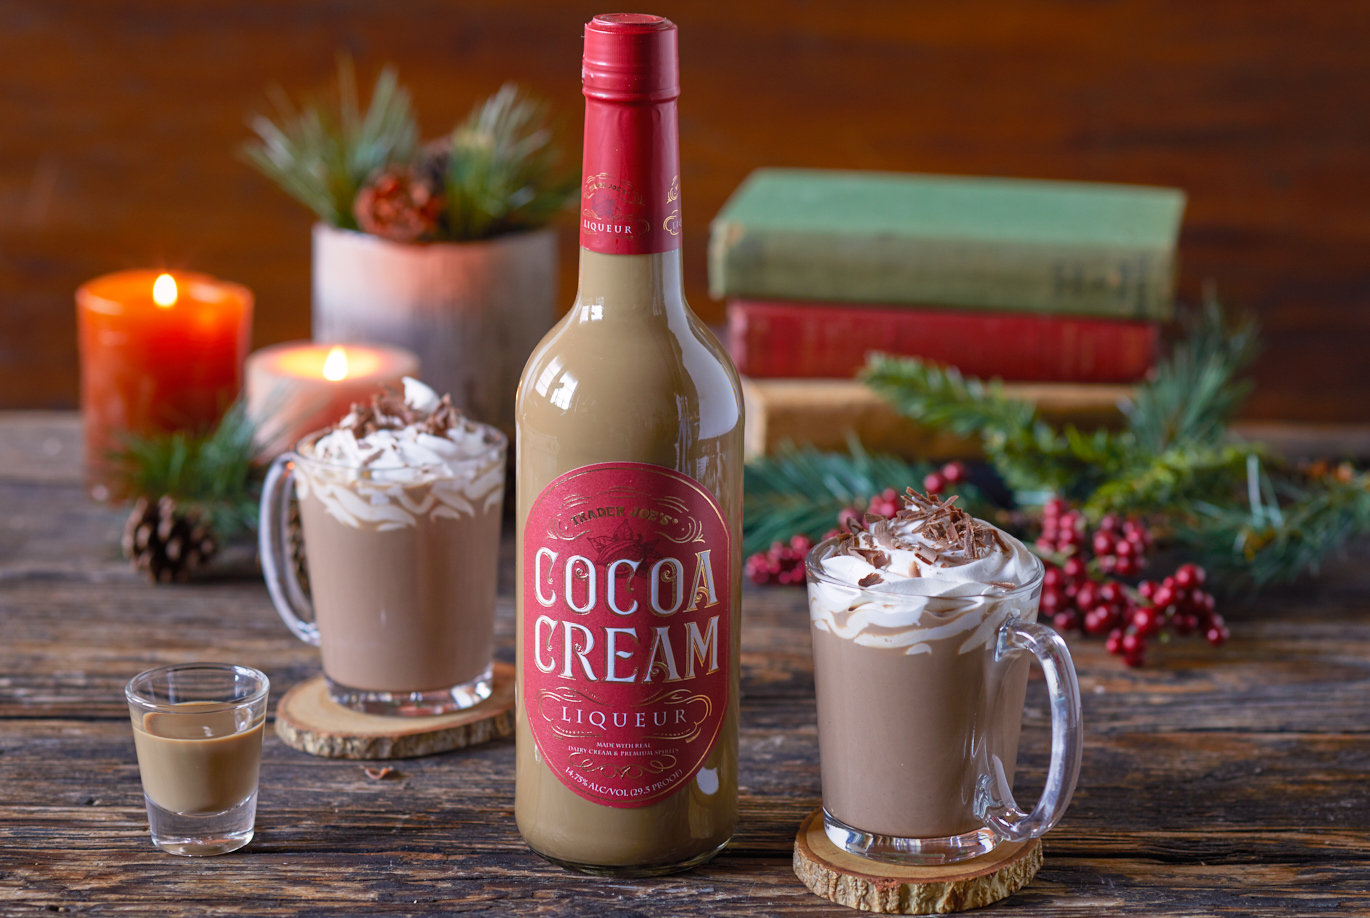 Trader Joe's Cocoa Cream Liqueur; shown in two glass mugs with hot cocoa & Cocoa Cream Liqueur, topped with whipped cream and chocolate shavings; moody wood backgound with candelight